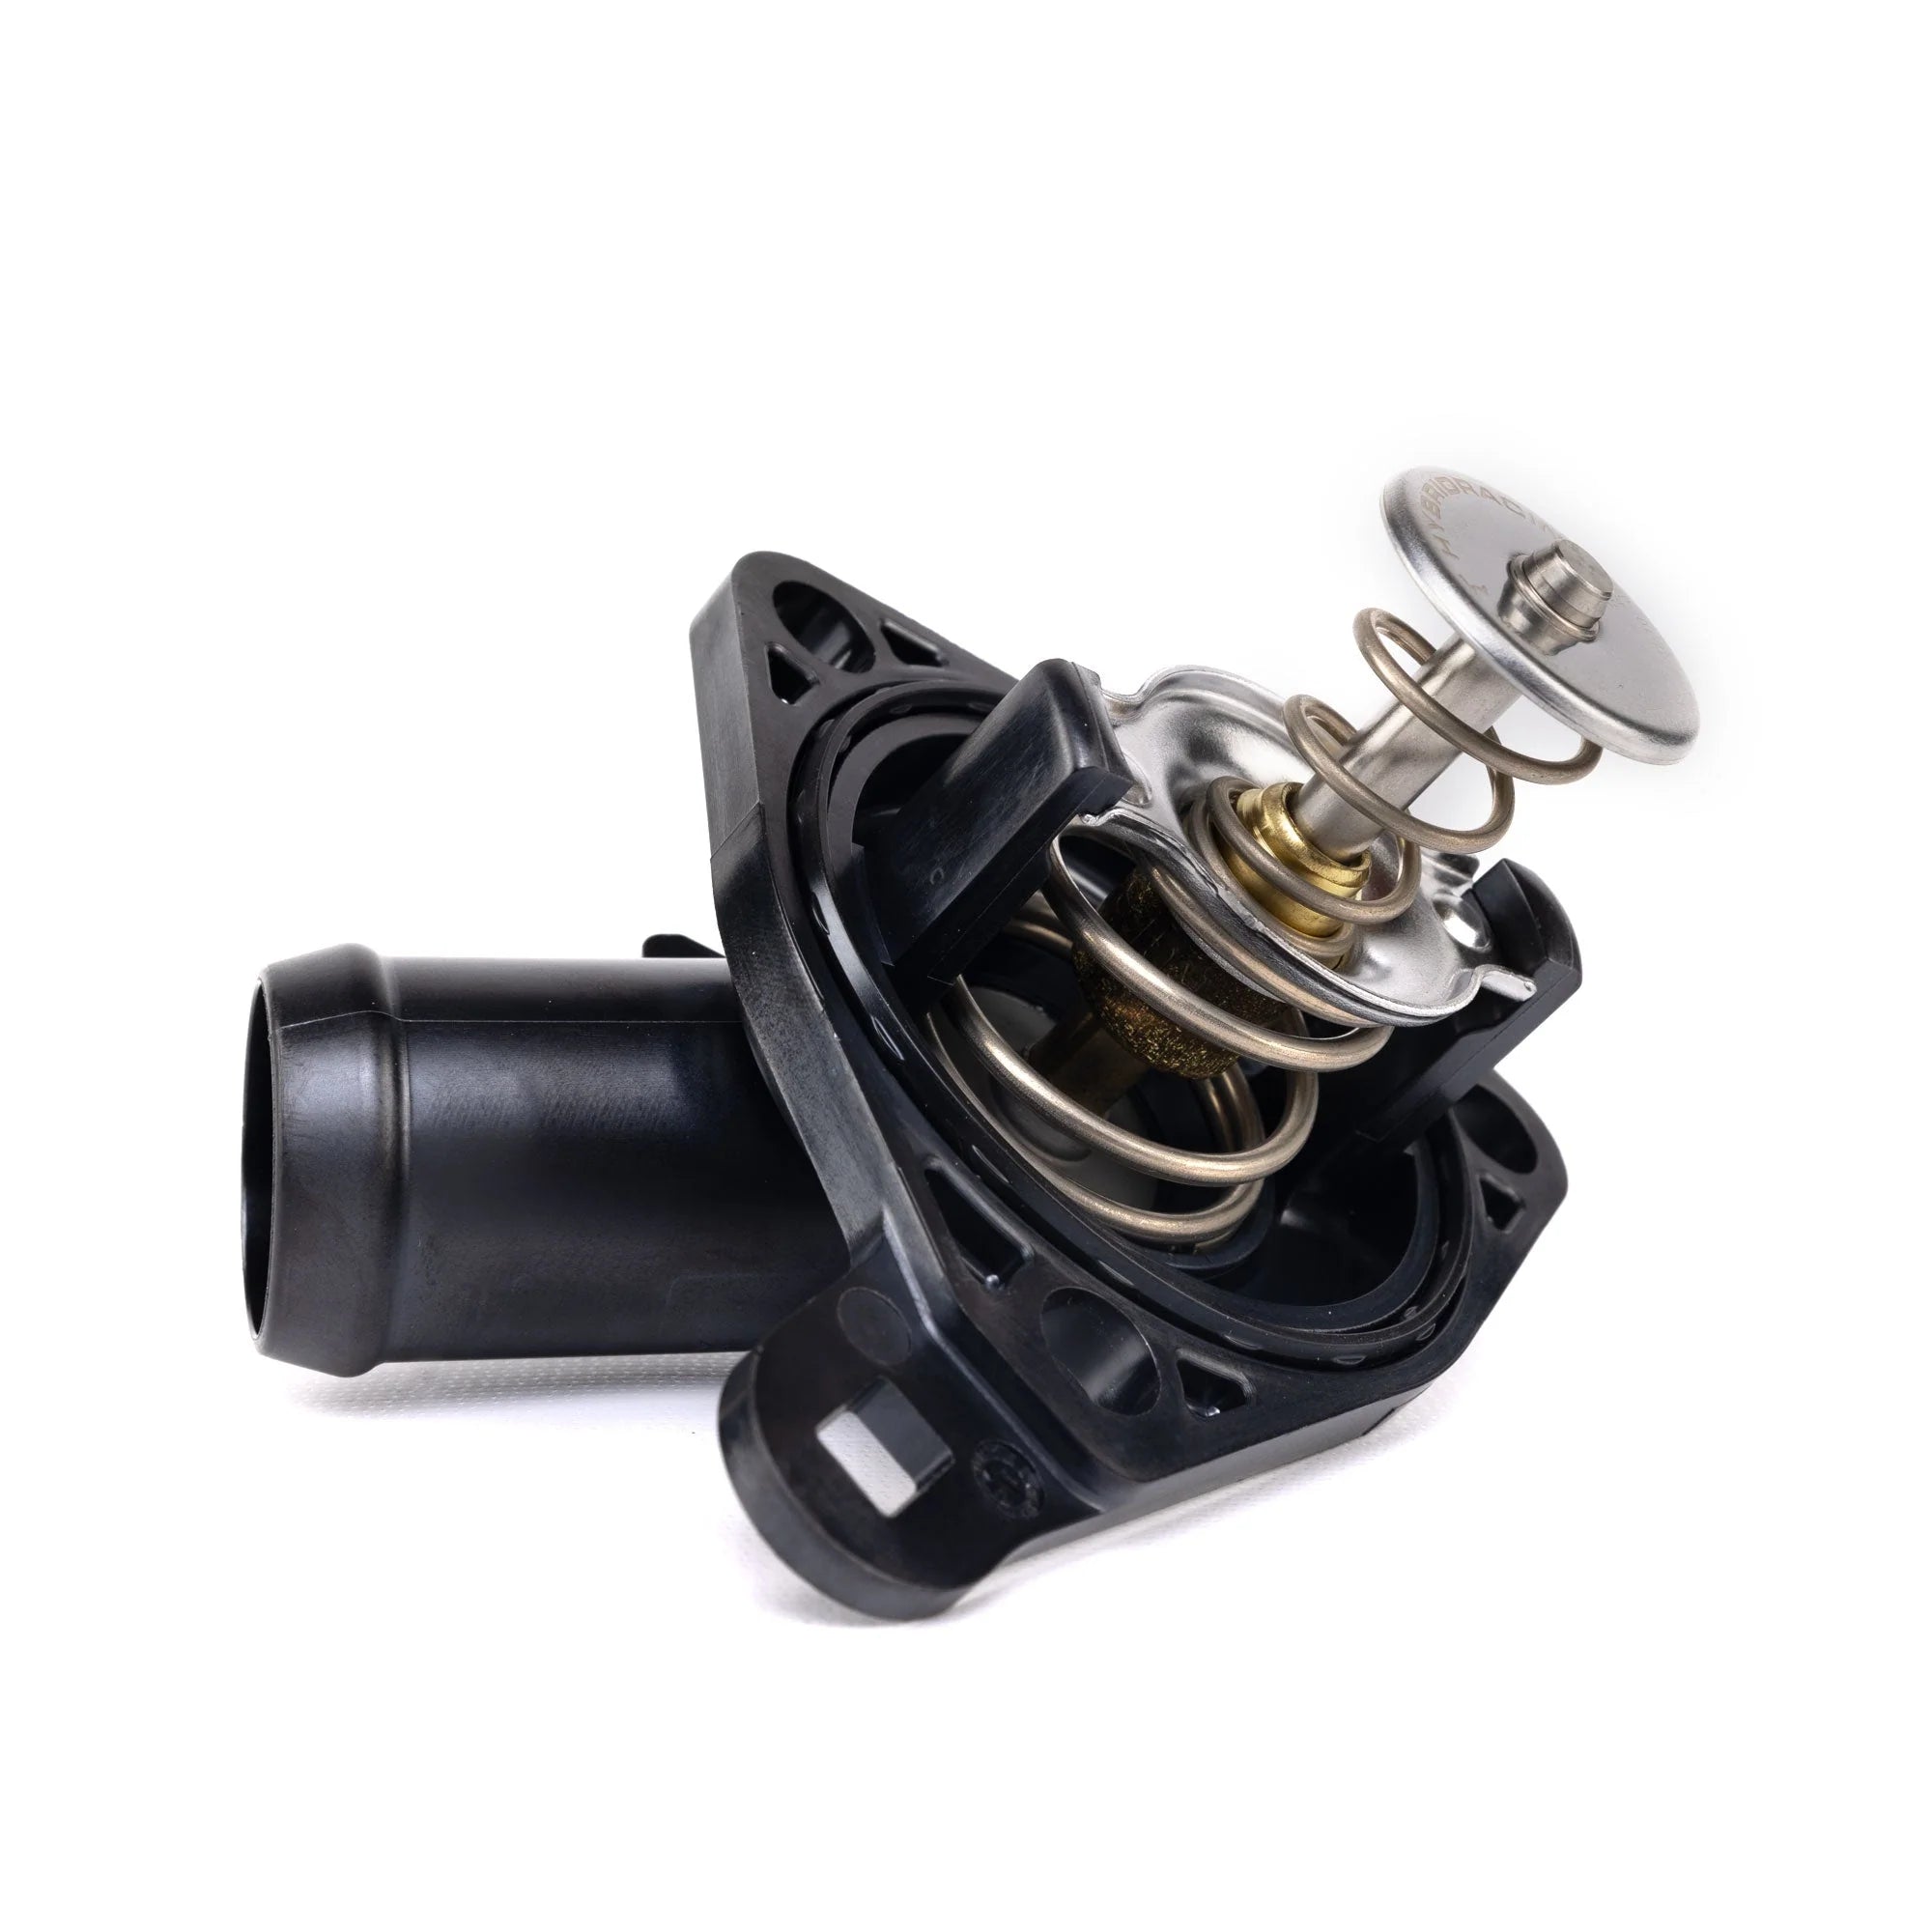 Hybrid Racing Low Temp Thermostat - K20A/A2/A3/Z1 and K24A1 Applications